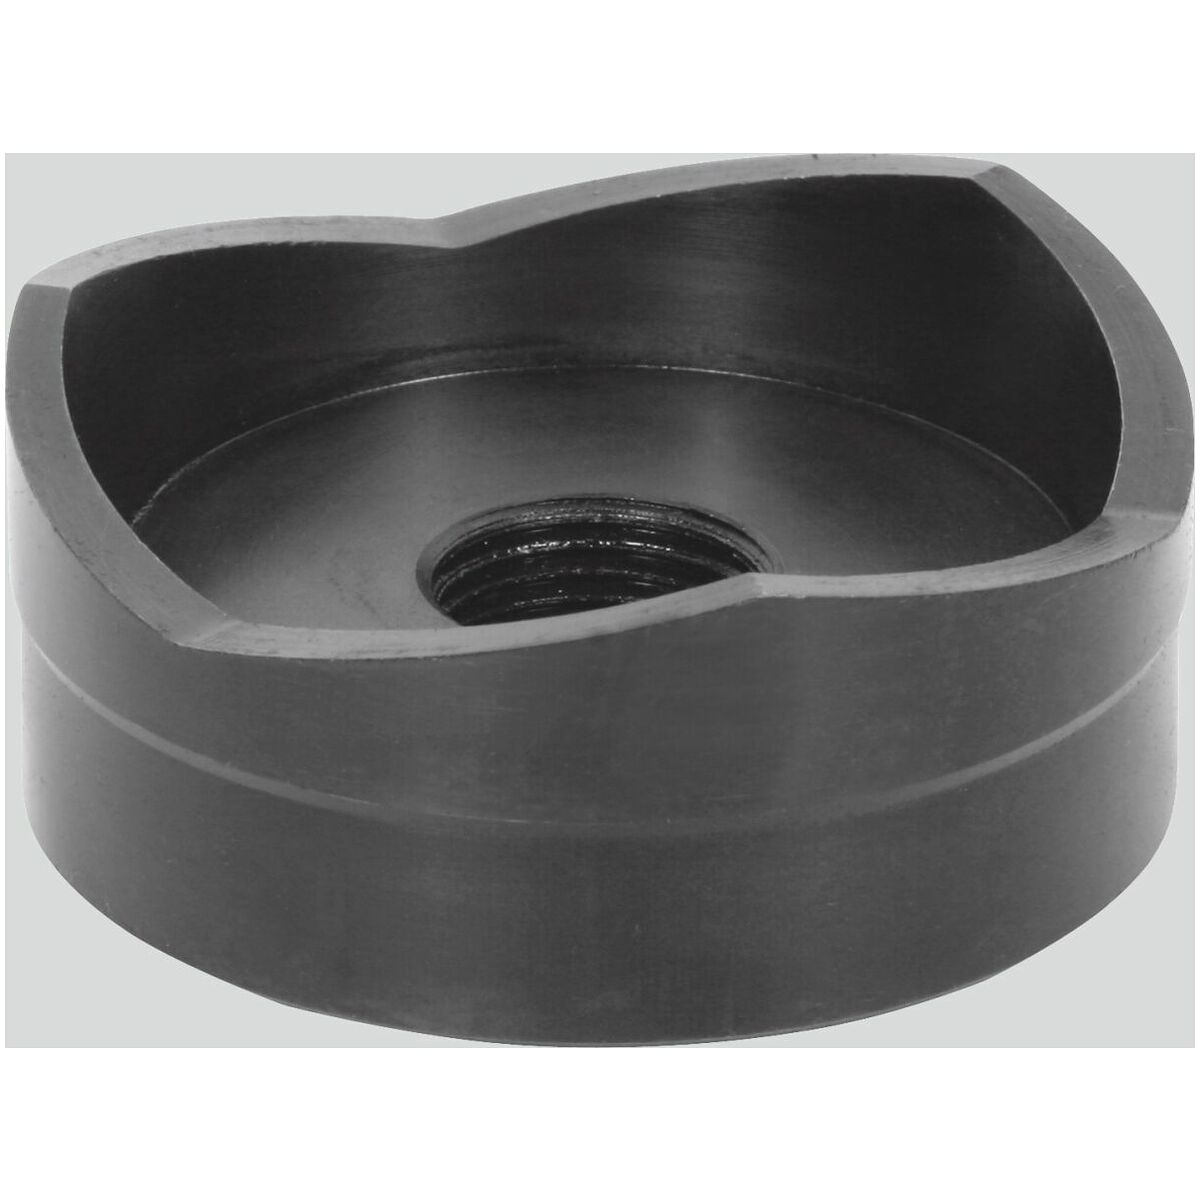 Simply buy Round sheet metal punch with ball thrust bearing